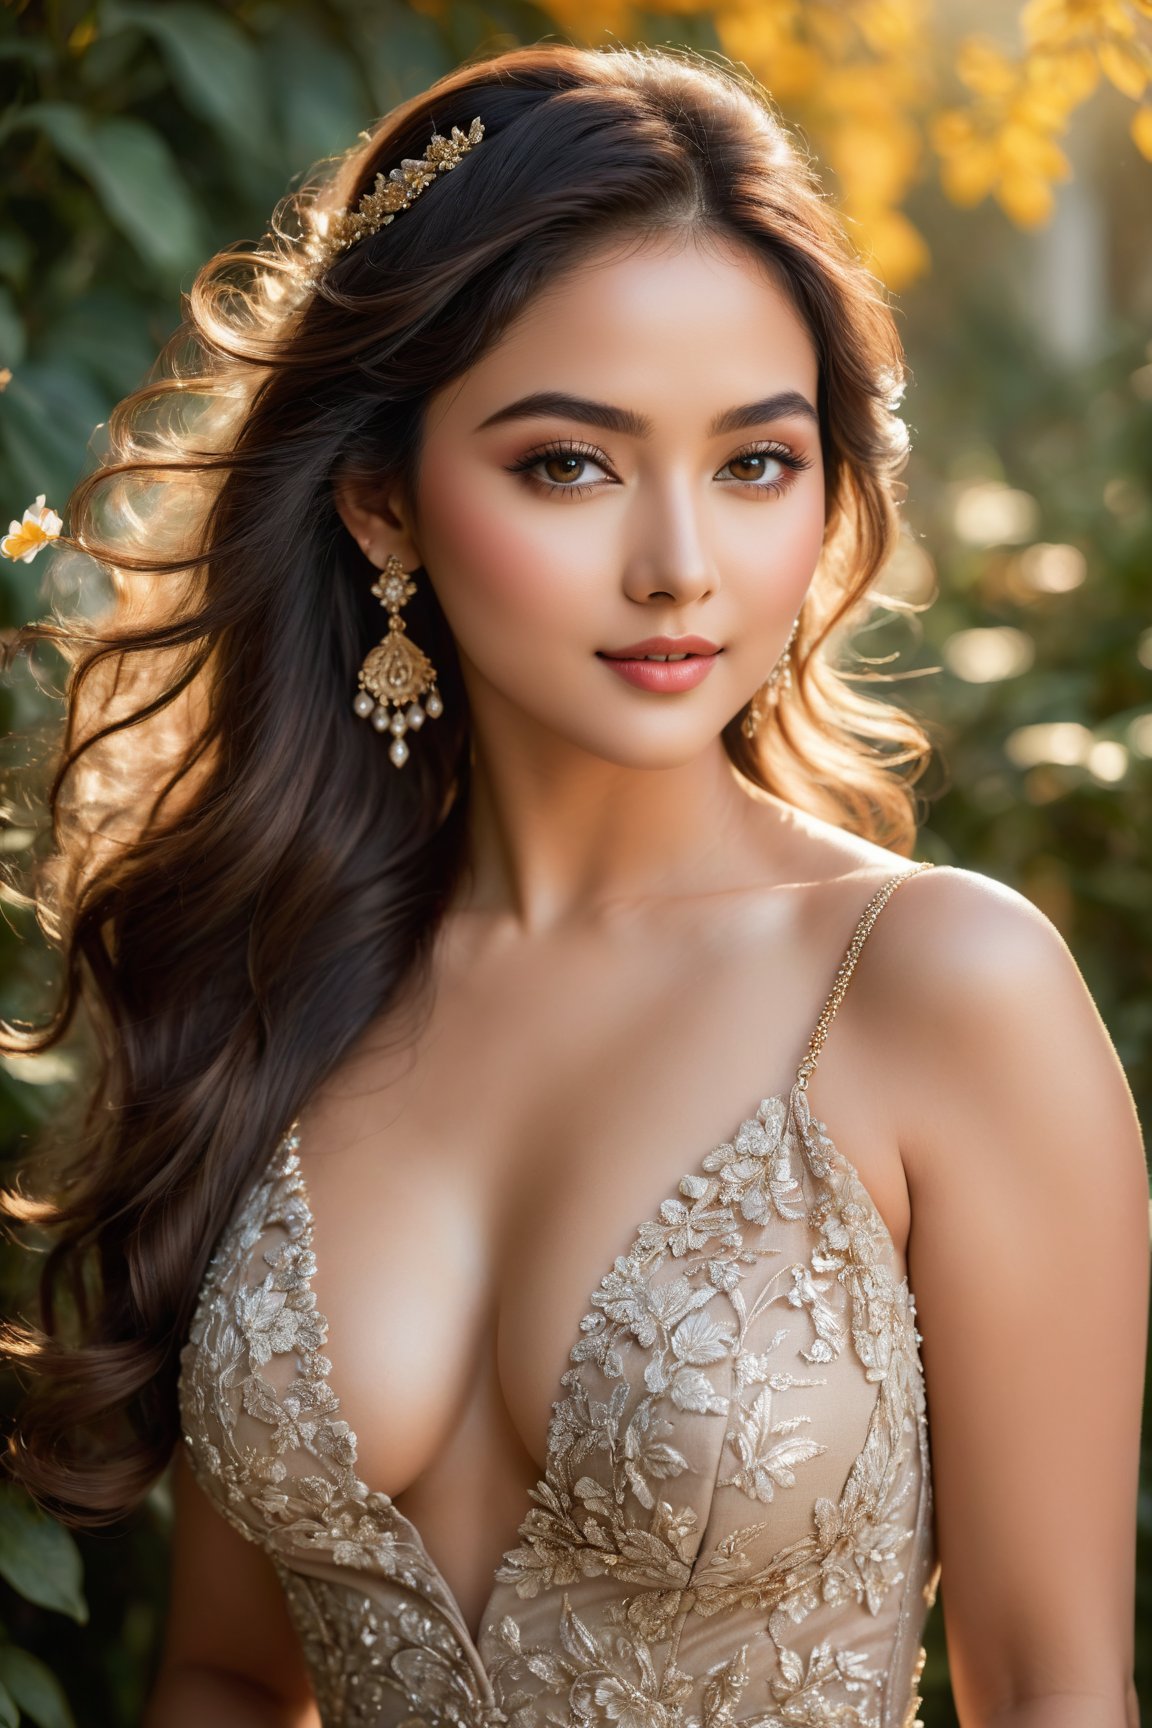 (best quality,4k,8k,highres,masterpiece:1.2),ultra-detailed,(realistic,photorealistic,photo-realistic:1.37),beautiful detailed eyes,beautiful detailed lips,extremely detailed eyes and face,long eyelashes,sexy outfit,gorgeous dress,indian woman,asian woman,perfect skin complexion,vibrant makeup,perfectly styled hair,romantic atmosphere,golden hour lighting,soft warm tones,dreamy background,picturesque garden setting,delicate flowers,subtle wind blowing,alluring gaze,sultry expression,seductive poses,mysterious atmosphere,confident posture,mesmerizing charm,exquisite jewelry,sparkling earrings,generous curves,voluptuous figure,graceful movements,attention-grabbing silhouette,sensuous vibes,striking beauty,attractive features,high cheekbones,ravishing smile,radiant personality,alluring presence,impressive physique,show-stopping appearance,mesmerizing eyes,enticing lips,ultimate feminine allure,eye-catching details,charming color palette,charismatic aura,impeccable attention to detail,flawlessly executed artwork,long flowing hair,tempting sensuality,ethereal grace,unforgettable elegance,irresistible magnetism,unapologetic confidence,enviable curves,captivating magnetism,exotic beauty,unforgettable masterpiece.